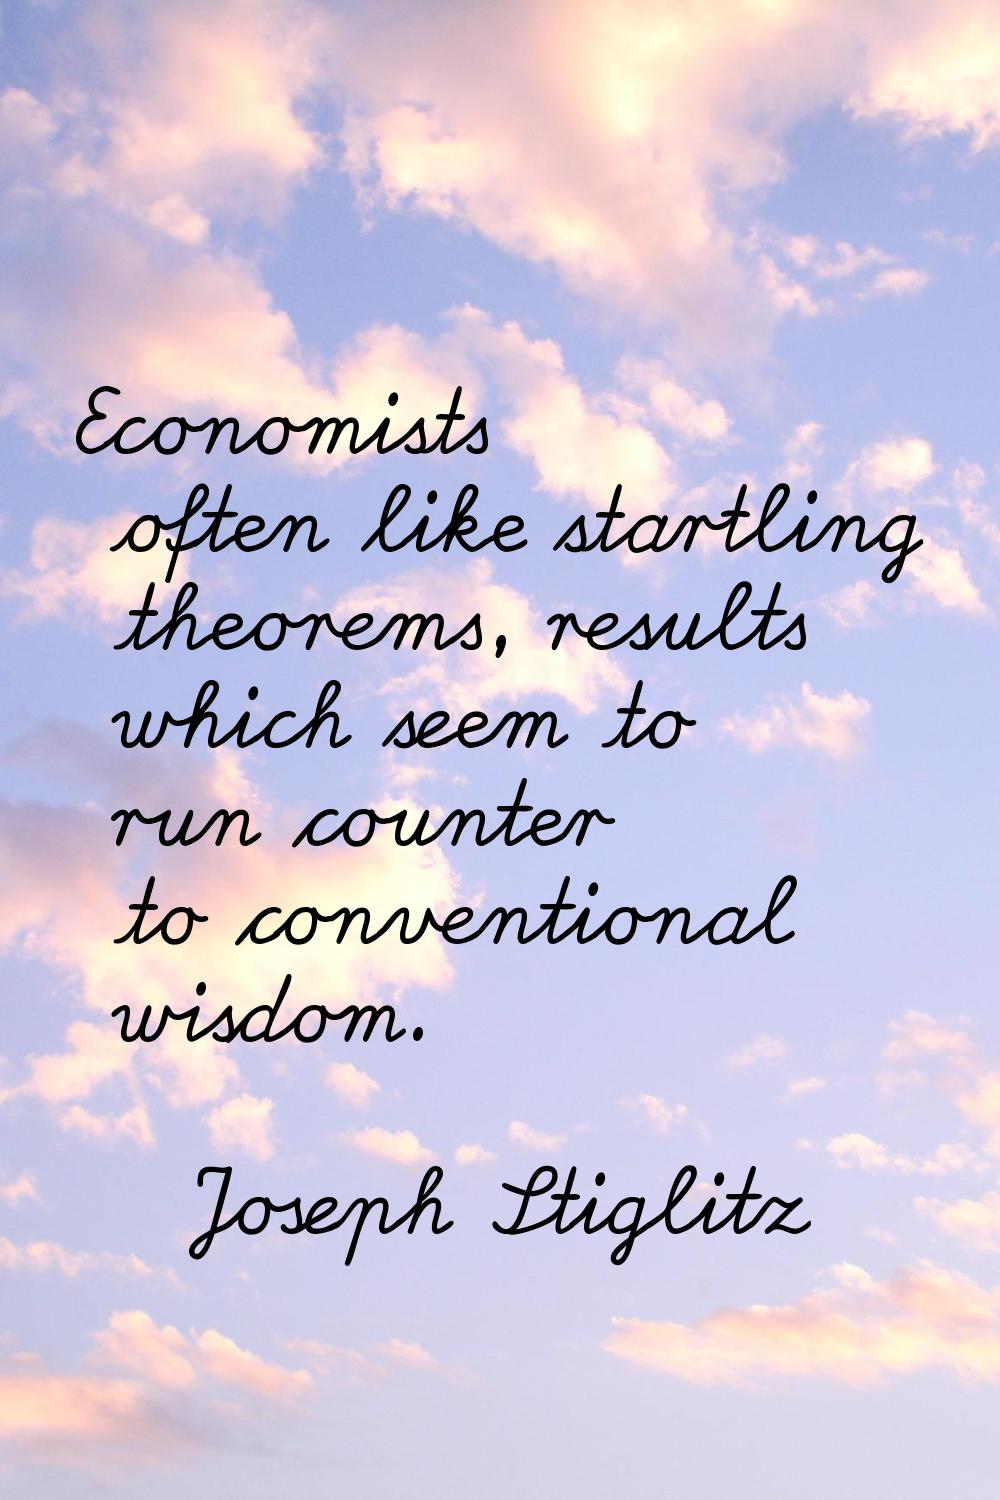 Economists often like startling theorems, results which seem to run counter to conventional wisdom.